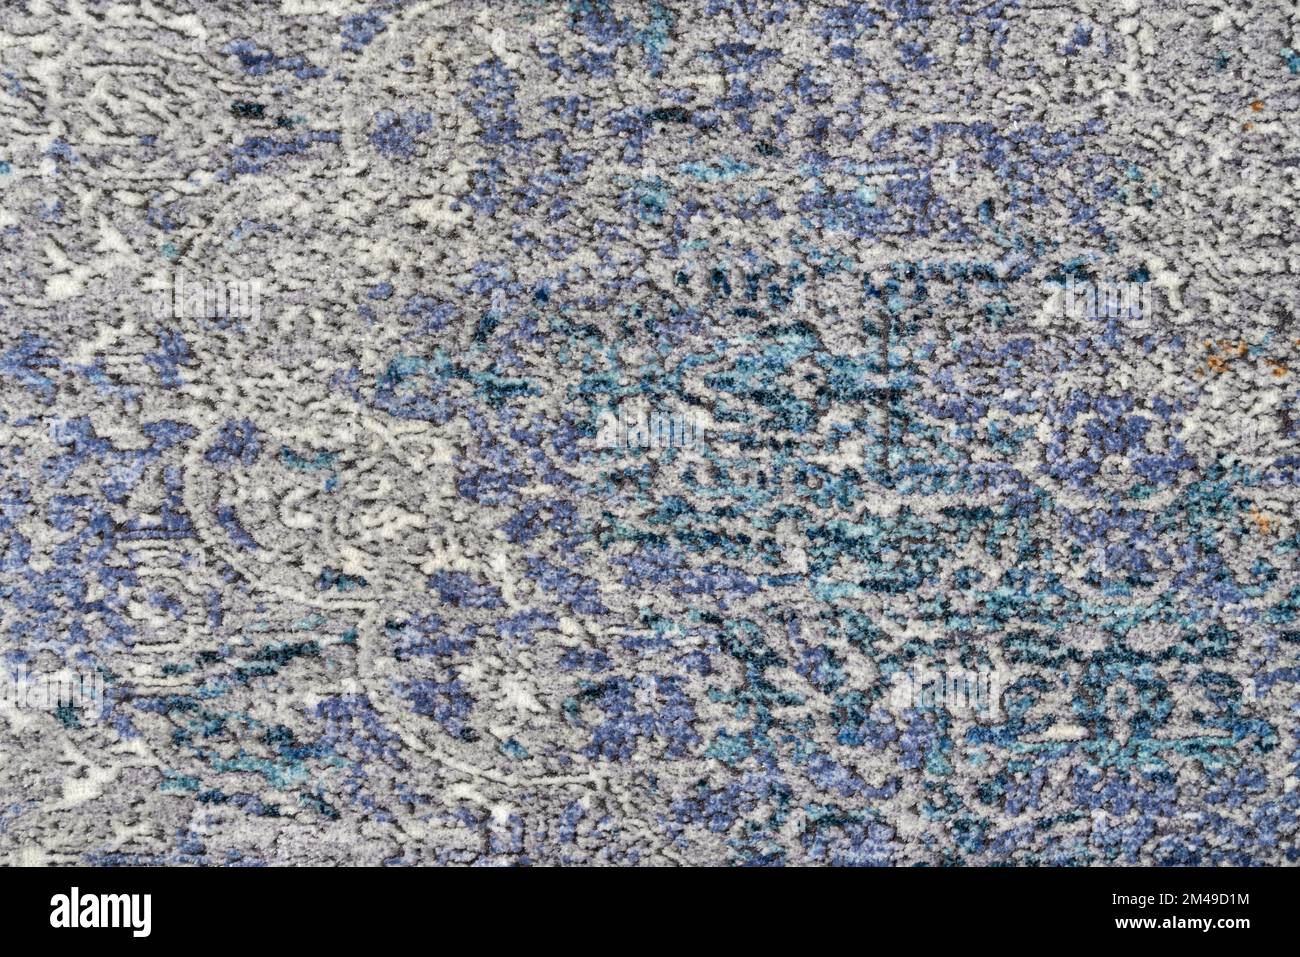 Texture of abstract, decorative velours multi-colored carpet fabric background. Close up of beautiful old blue and beige pile rug with barely visible pattern. Concept of background and textures. Stock Photo